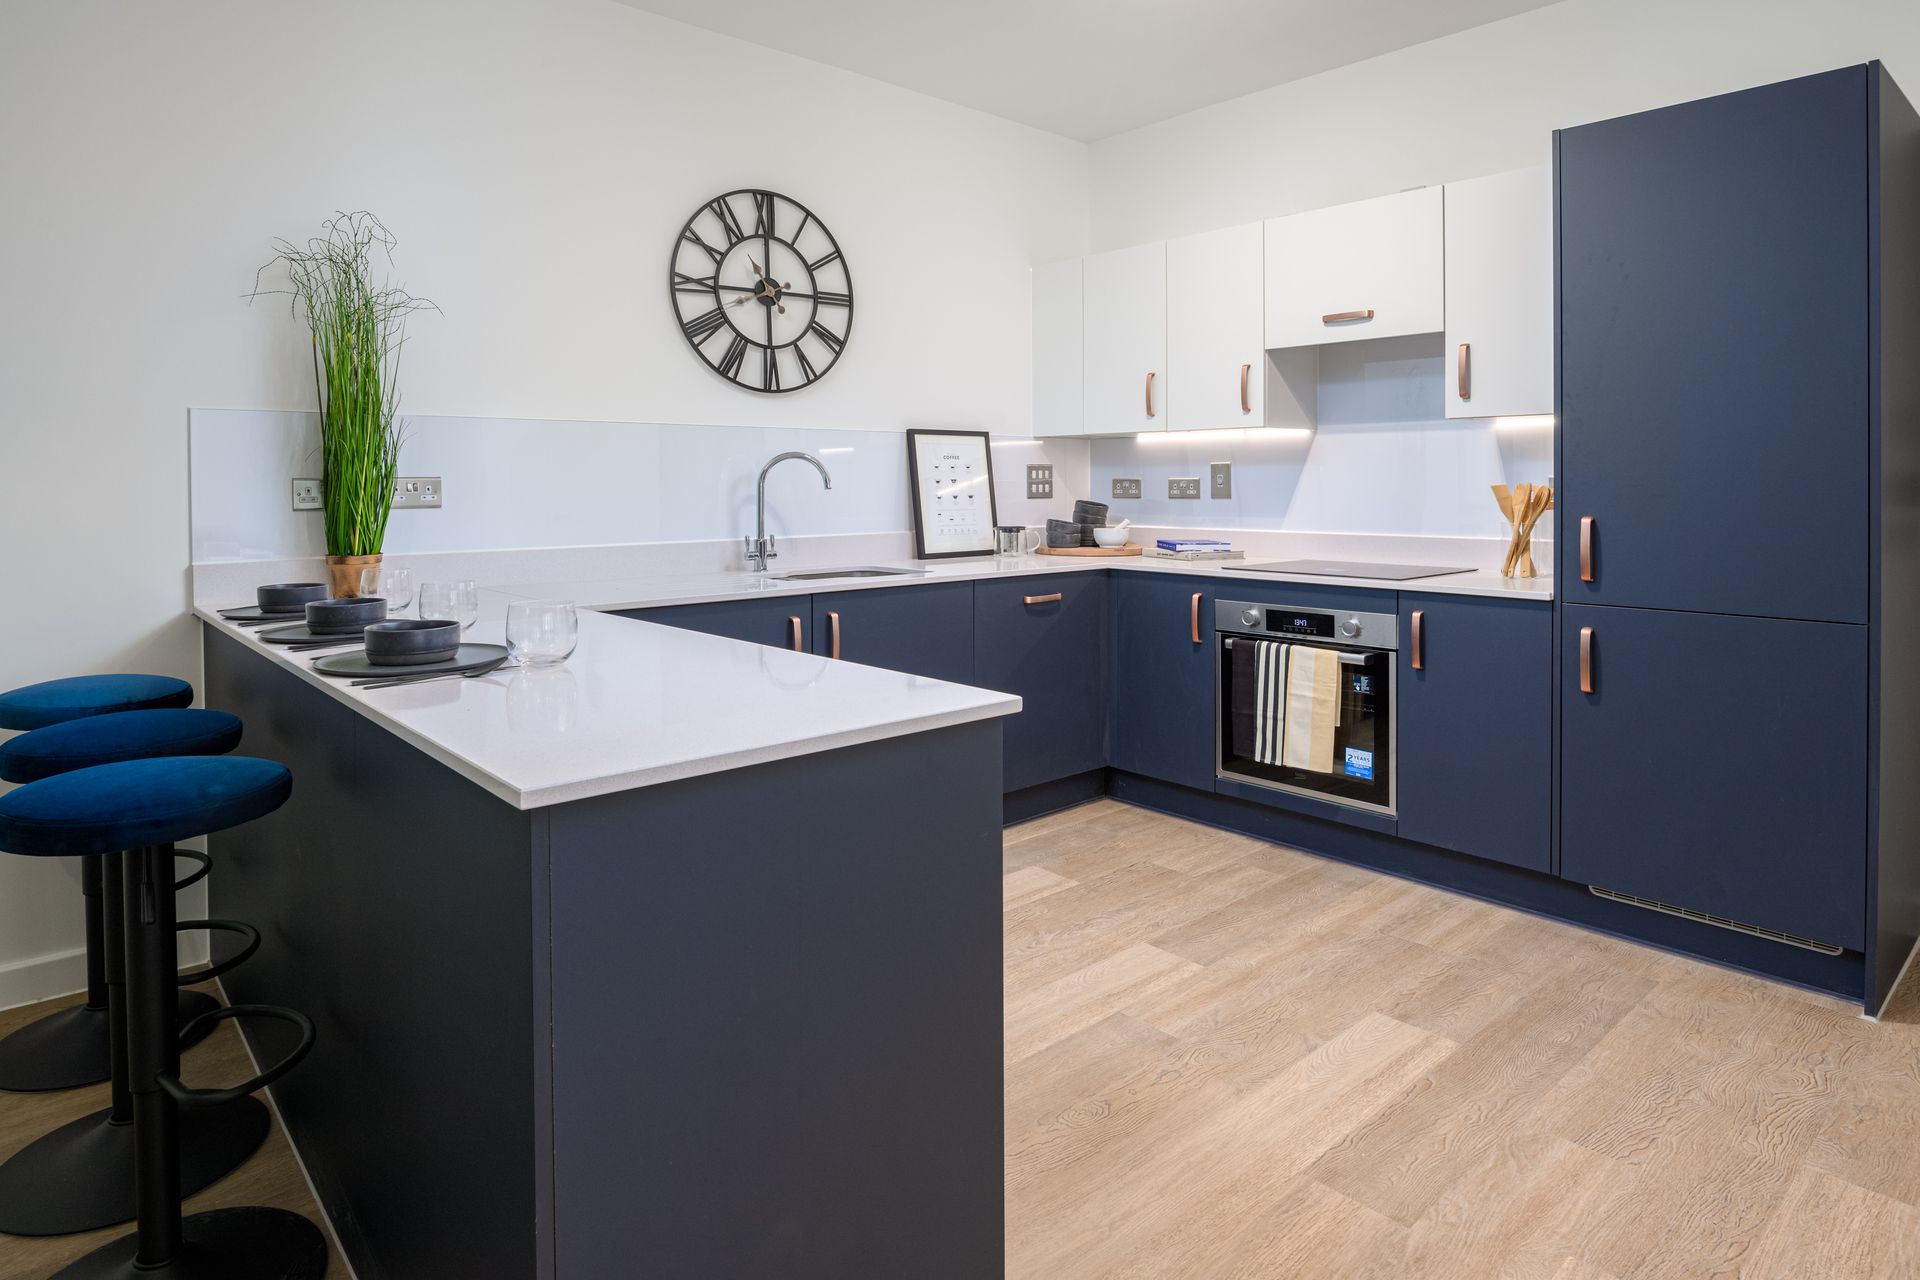 A kitchen with blue cabinets and a clock on the wall at Walton Court.